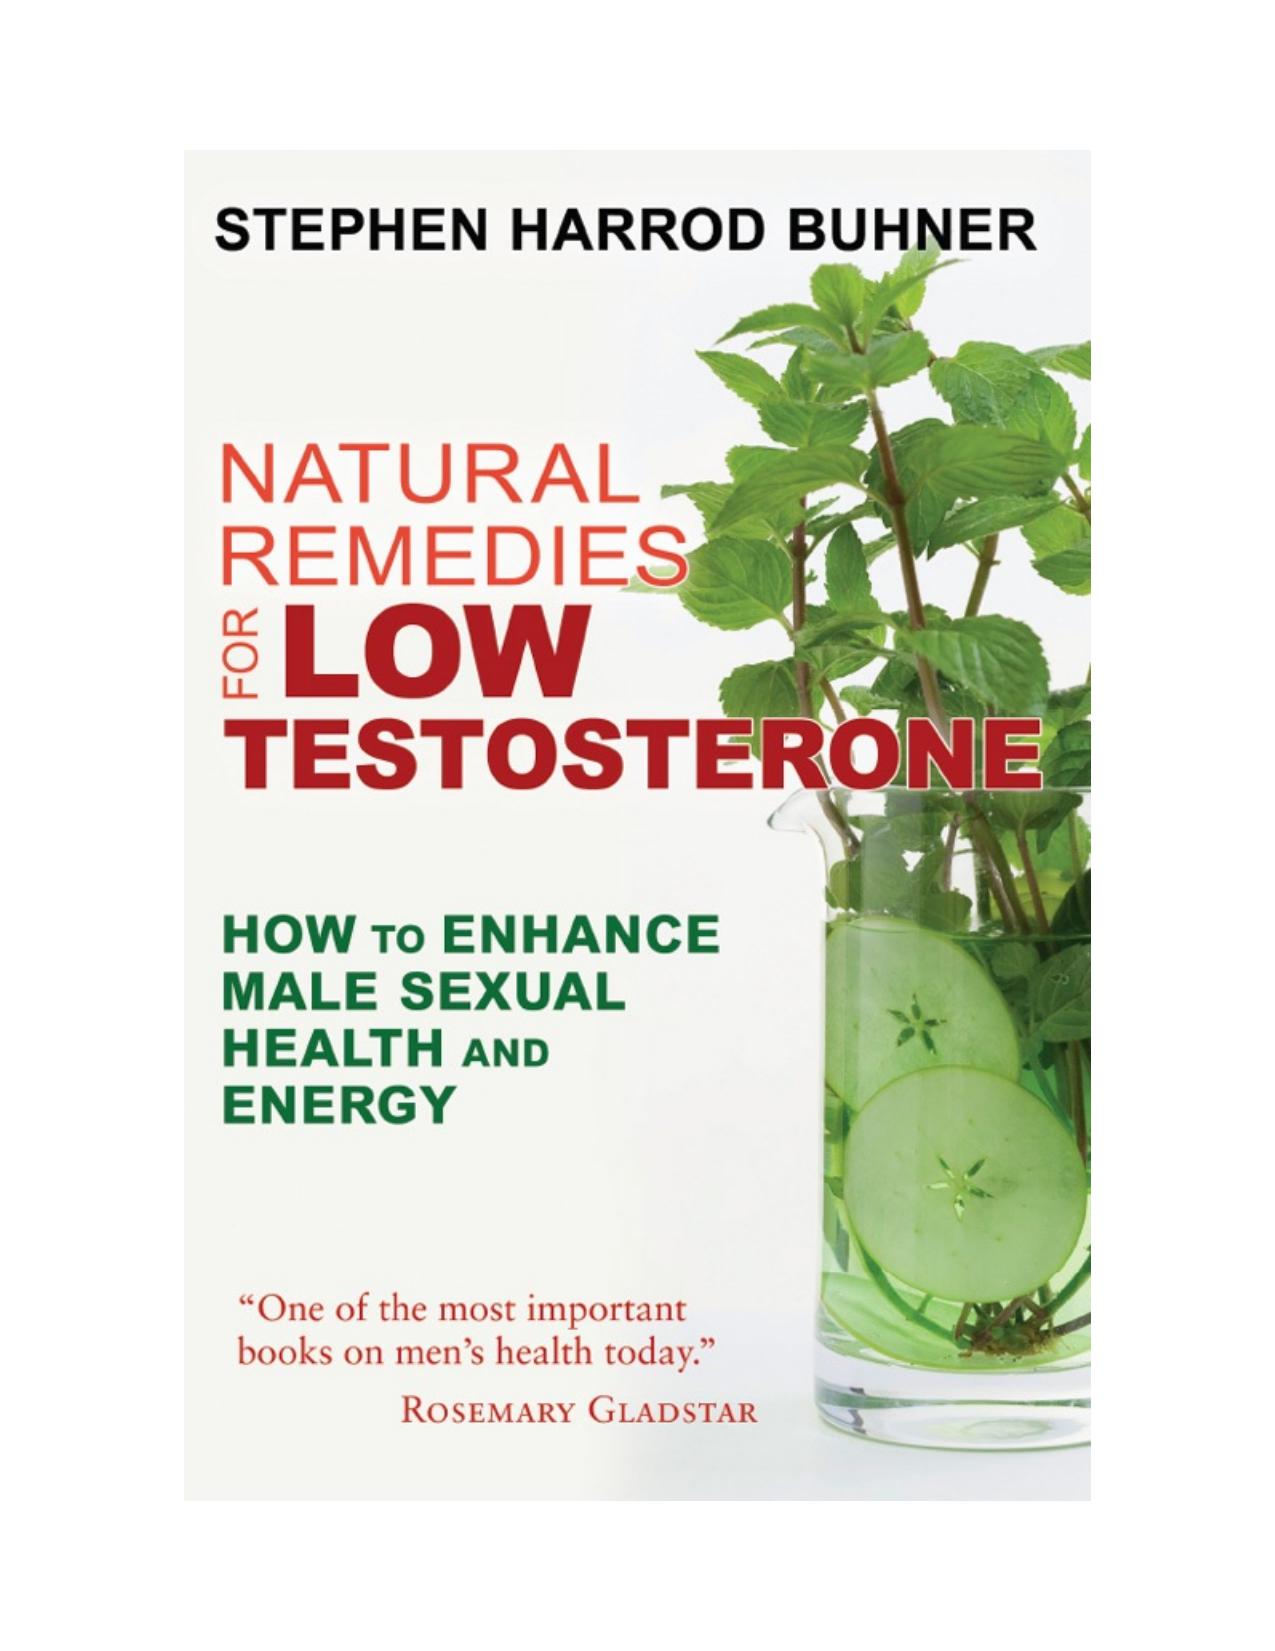 Natural Remedies for Low Testosterone by Stephen Harrod Buhner